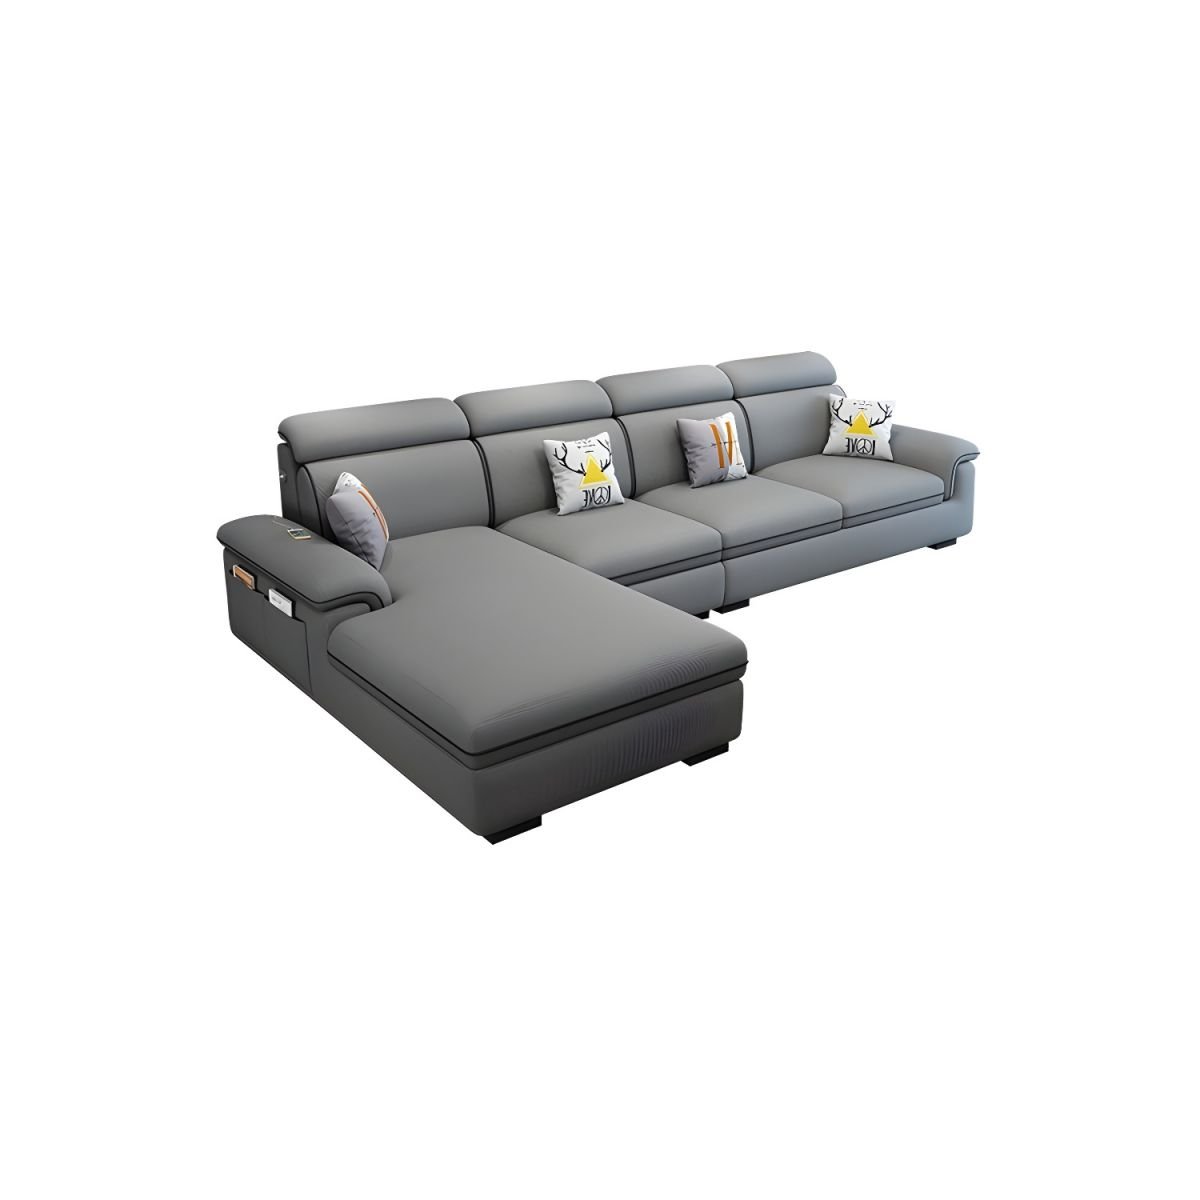 Wooden Modern 9 Feet L-Shape Sectionals No Distressing Seats 4 Storage Included Sofa Chaise - Linen Grey Left